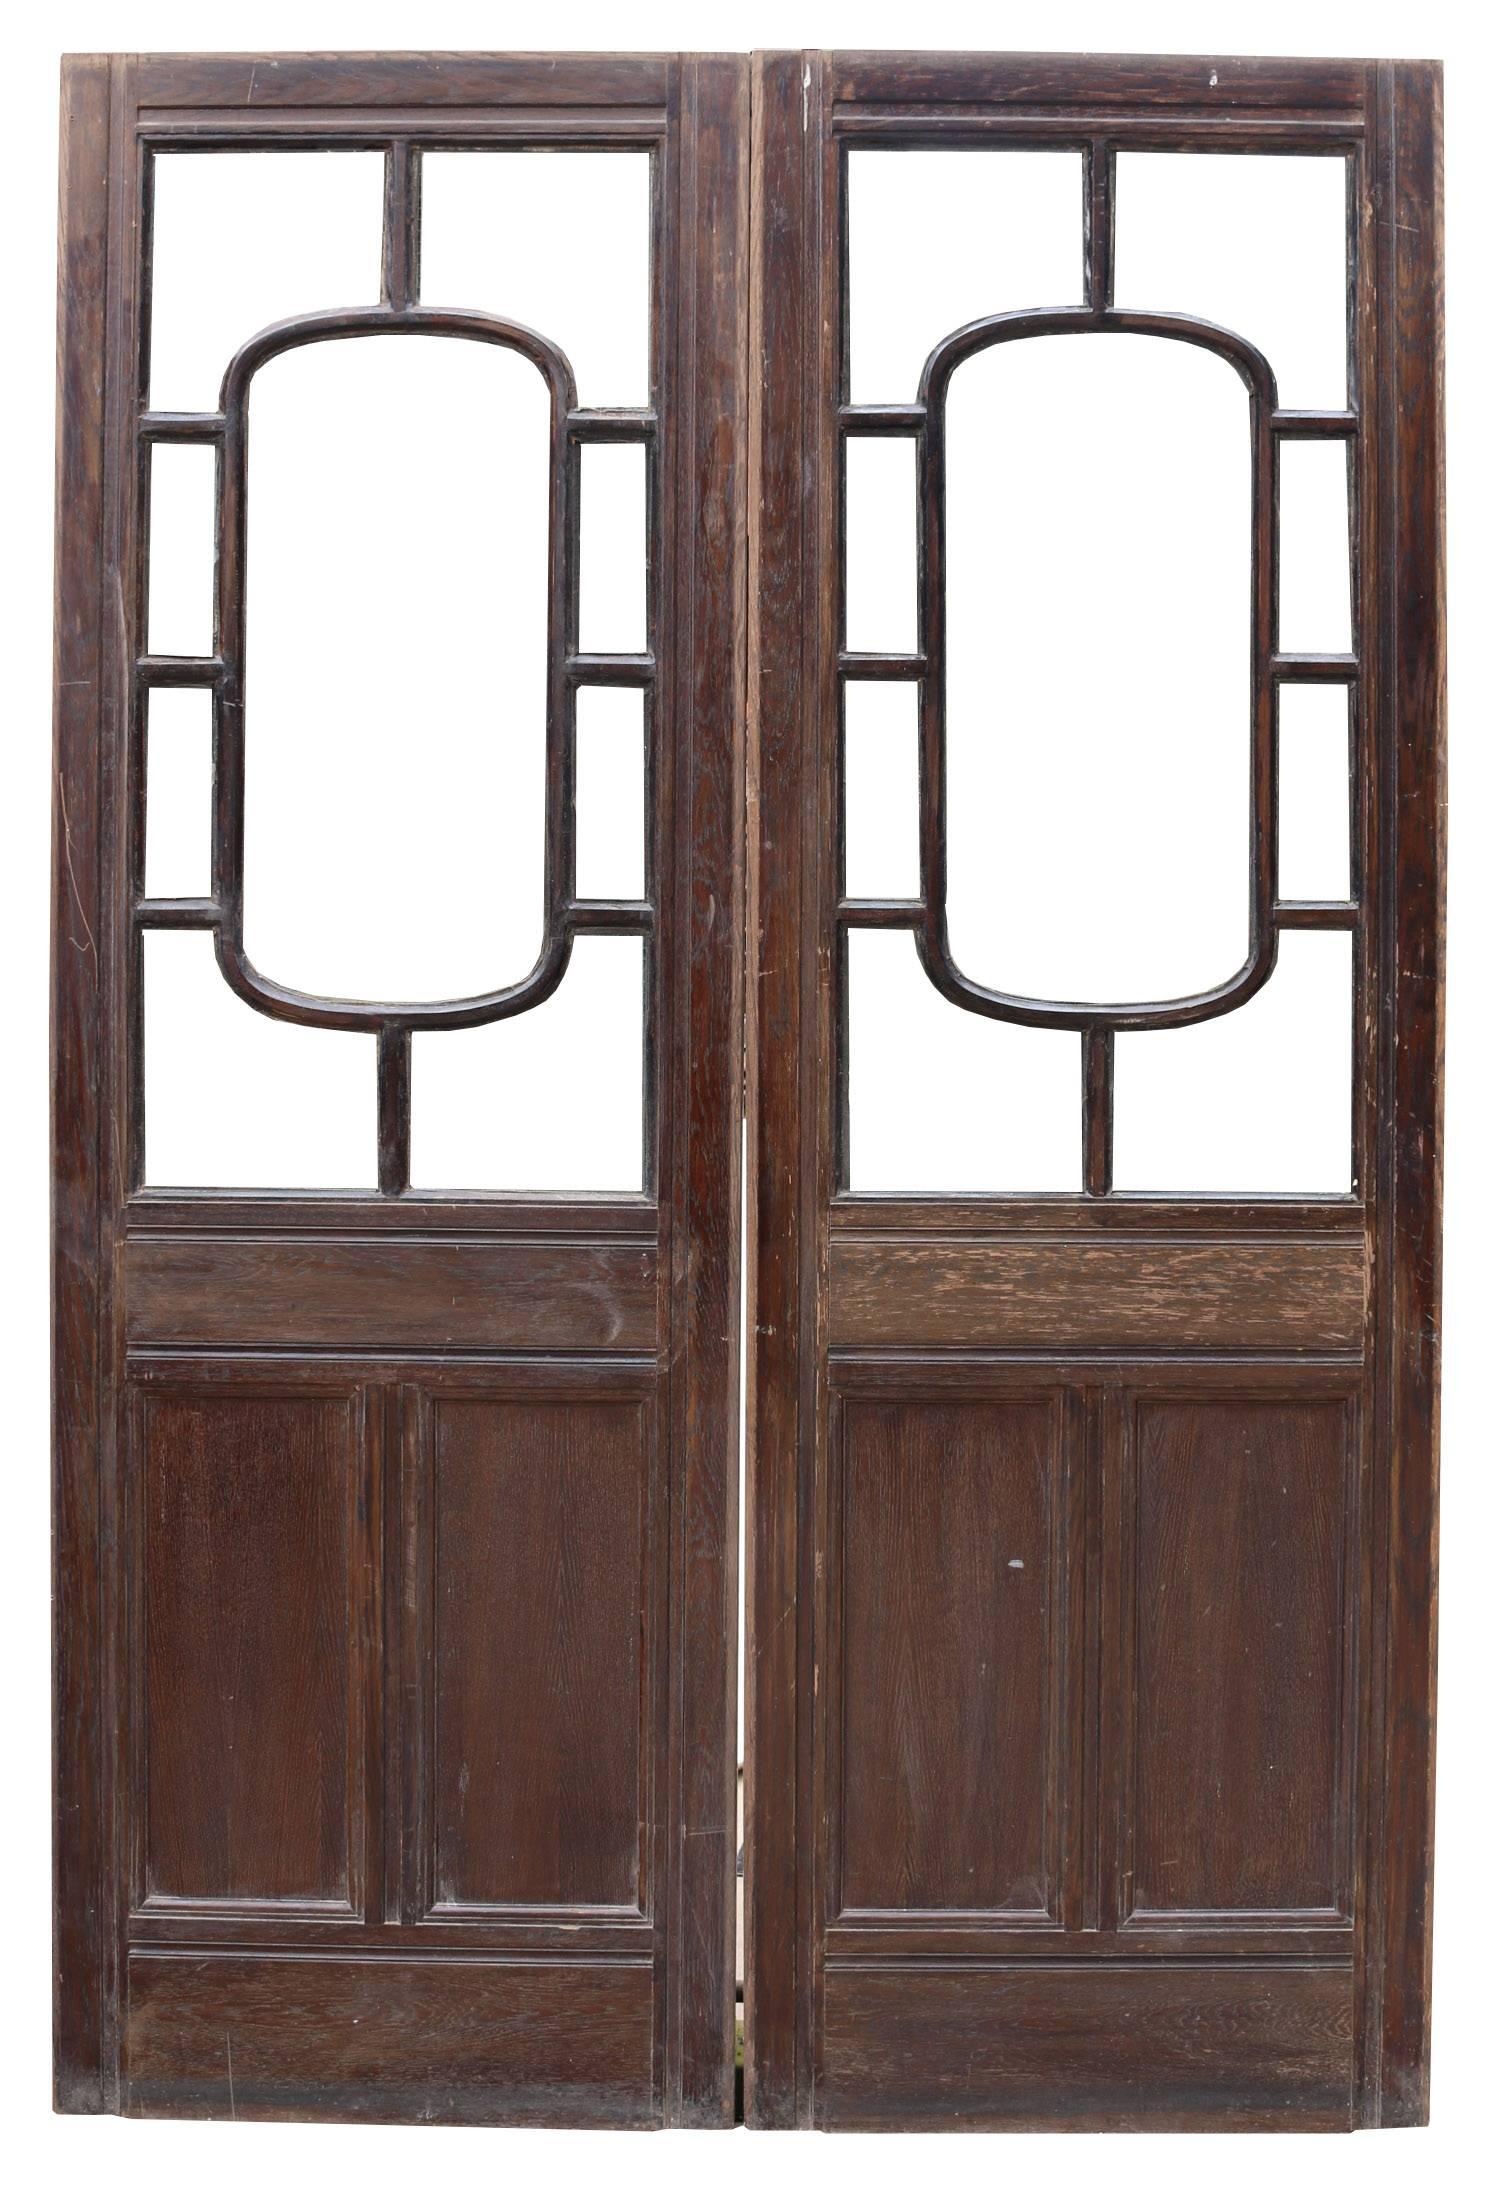 These doors have wired glass, which could be replaced if required. They do not have a rebate or hinges.
Measure: Weight 24 kg each.